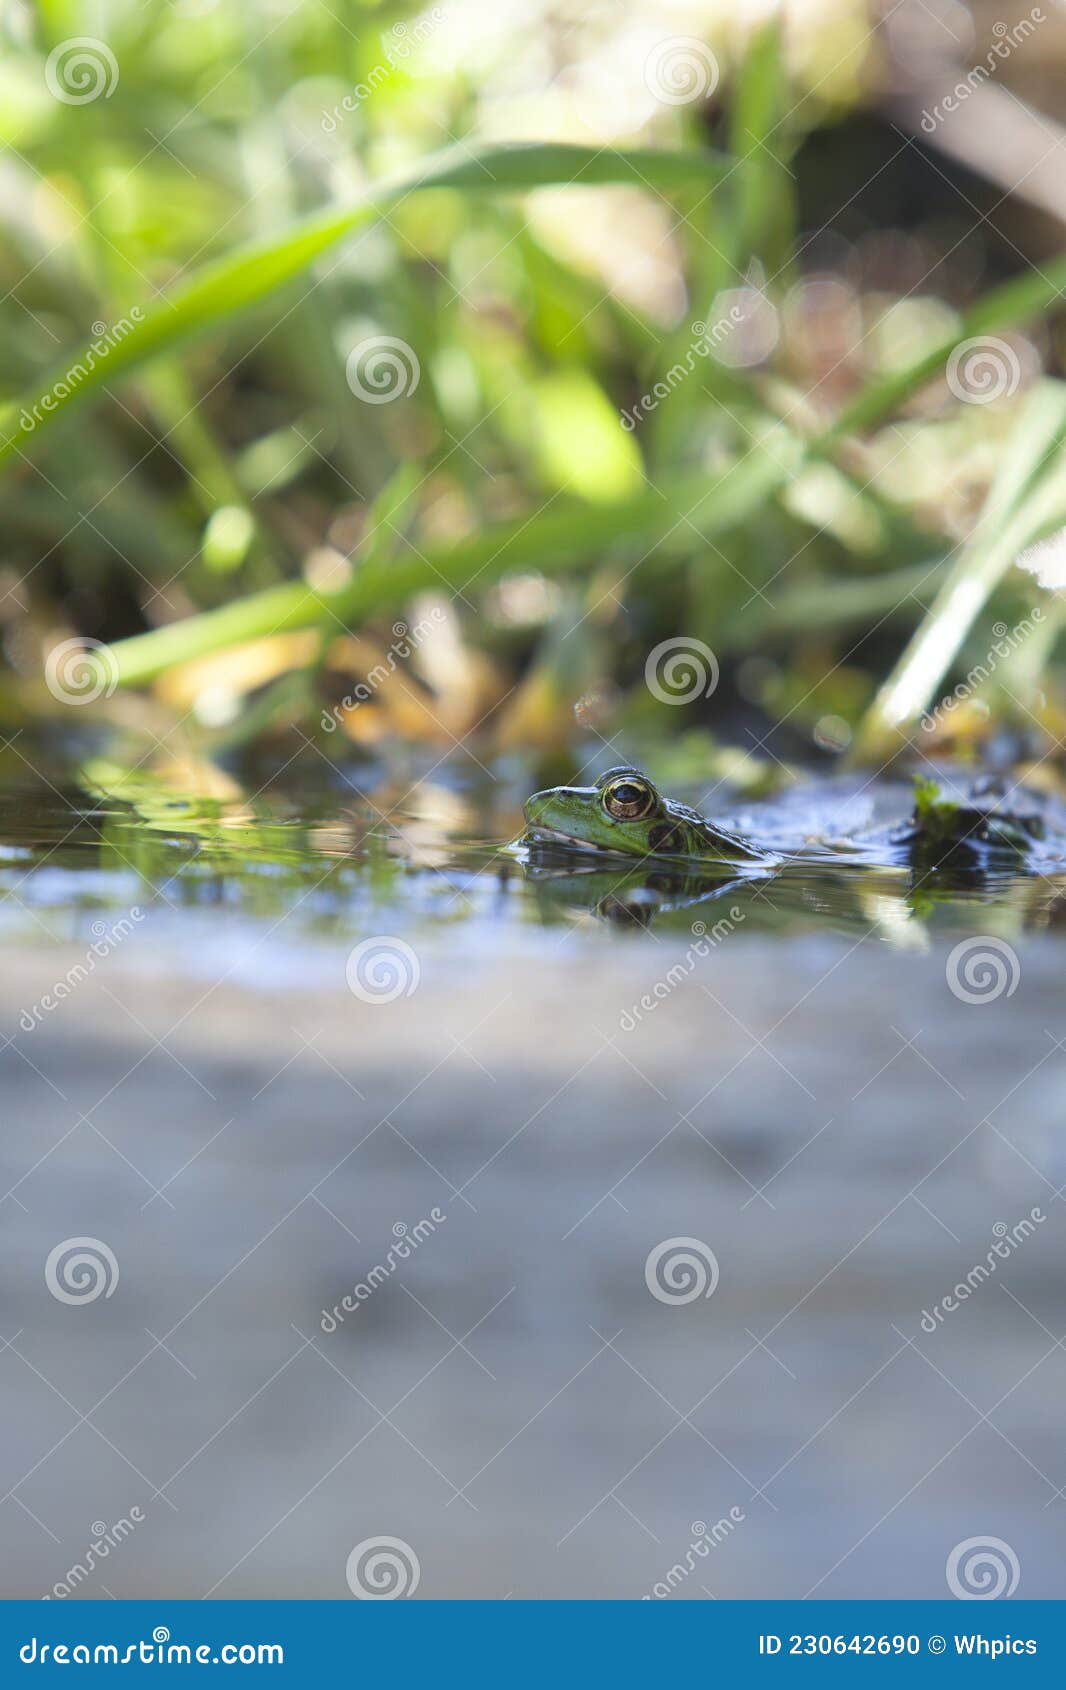 iberian green frog, half-sunked at litle mountain stream